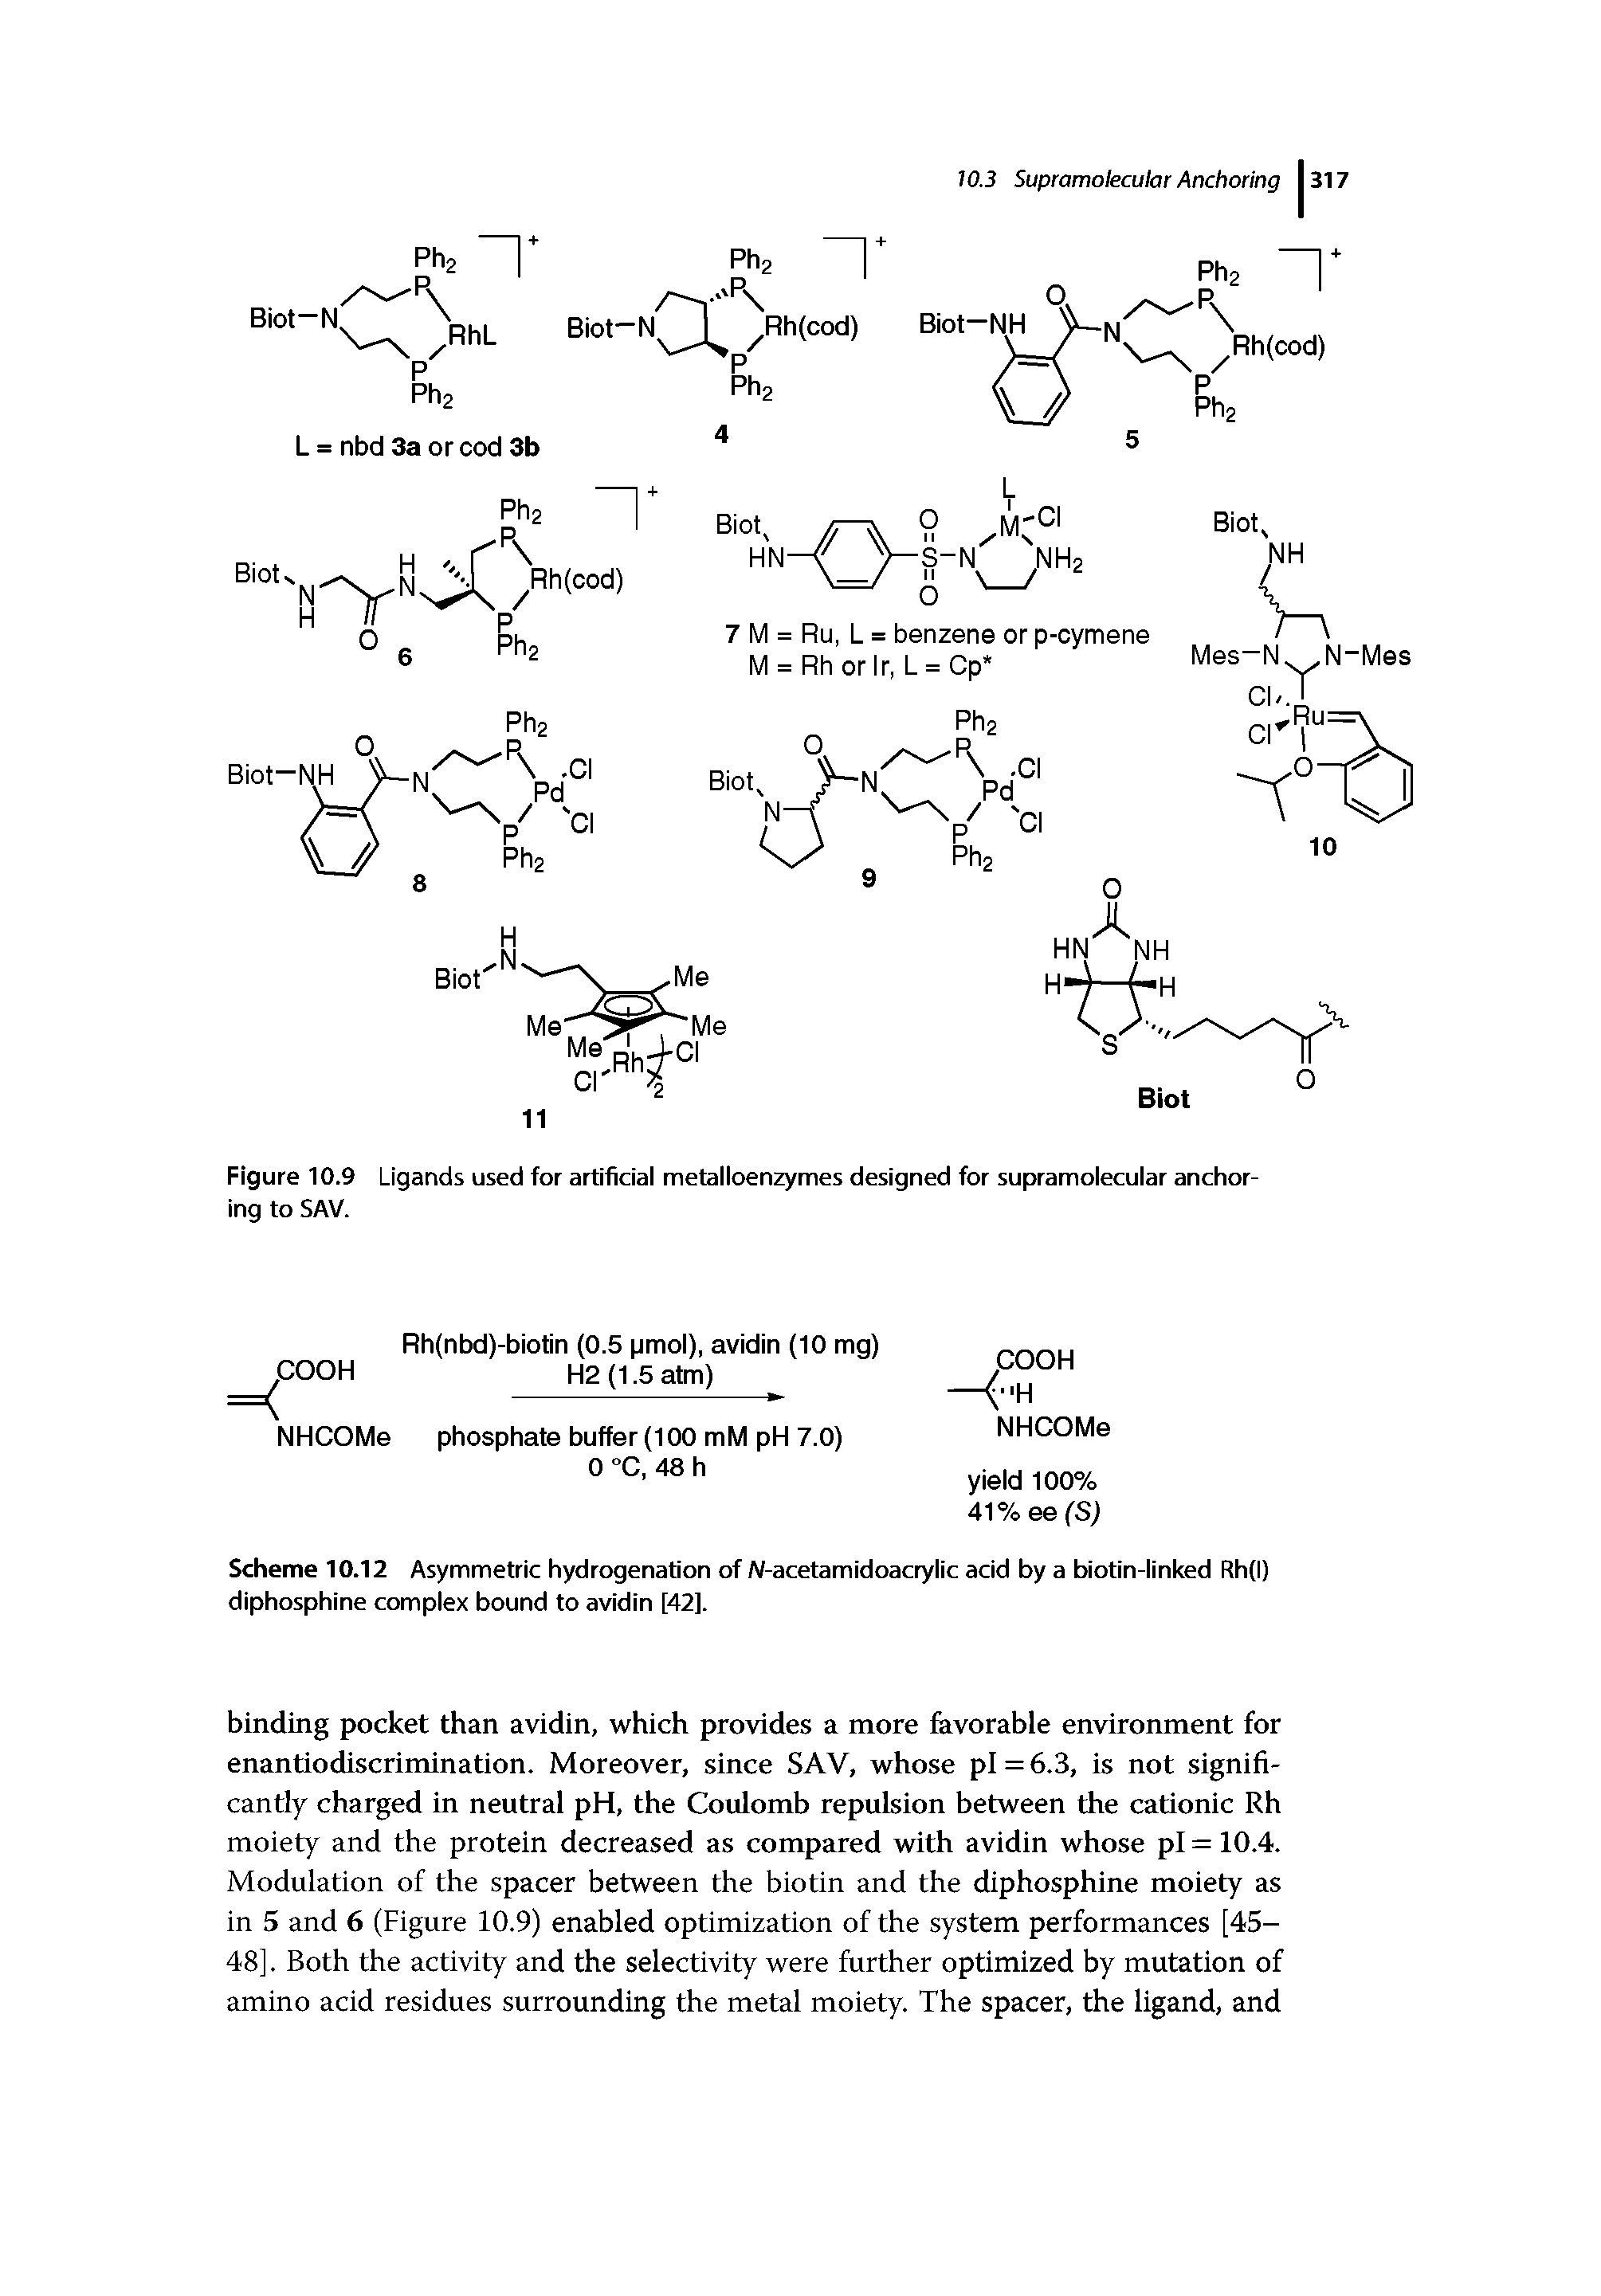 Figure 10.9 Ligands used for artificial metalloenzymes designed for supramolecular anchoring to SAV.